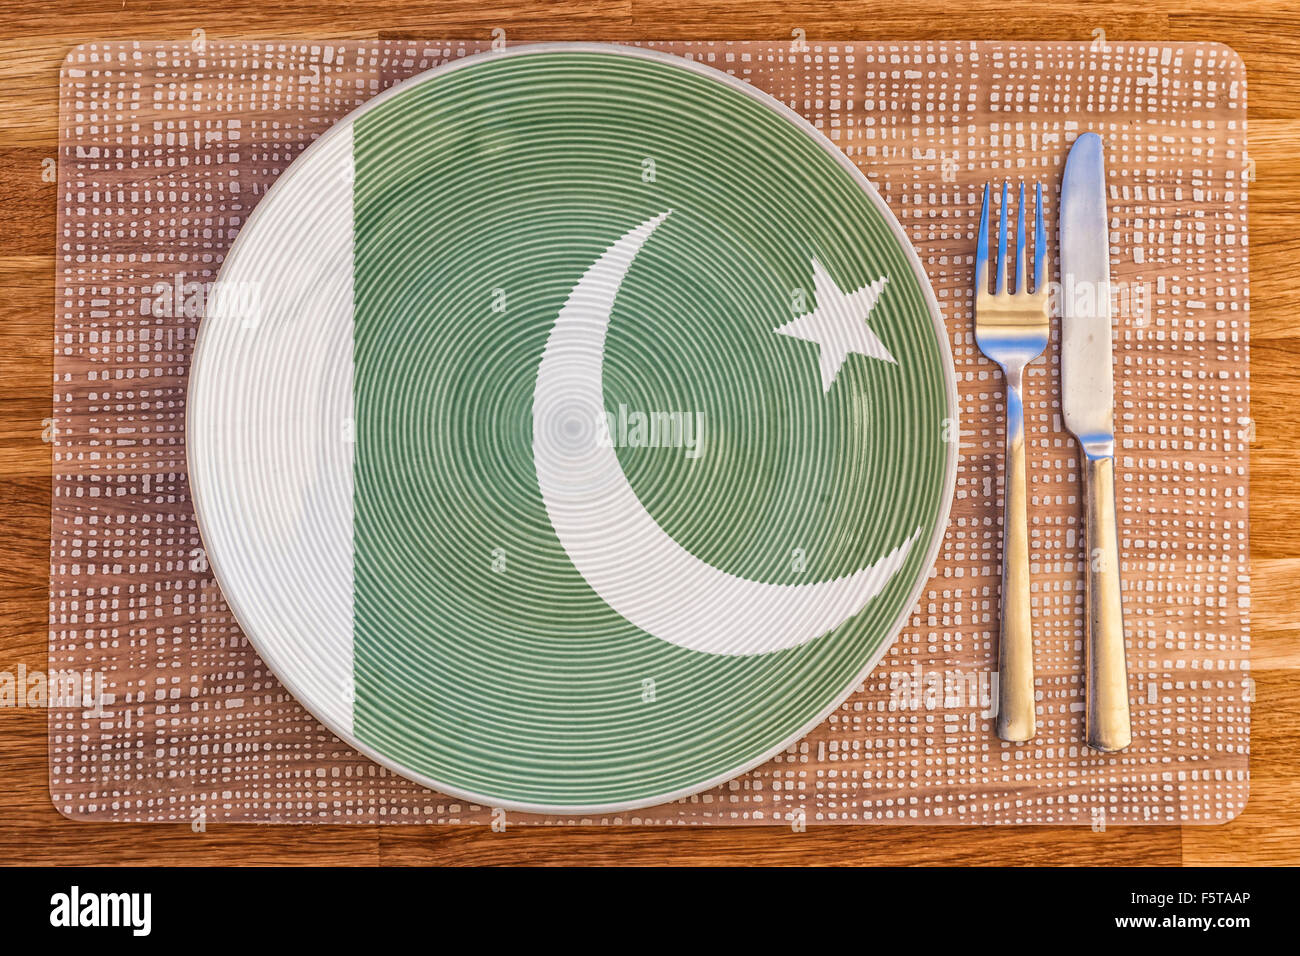 Dinner plate with the flag of Pakistan on it for your international food and drink concepts. Stock Photo